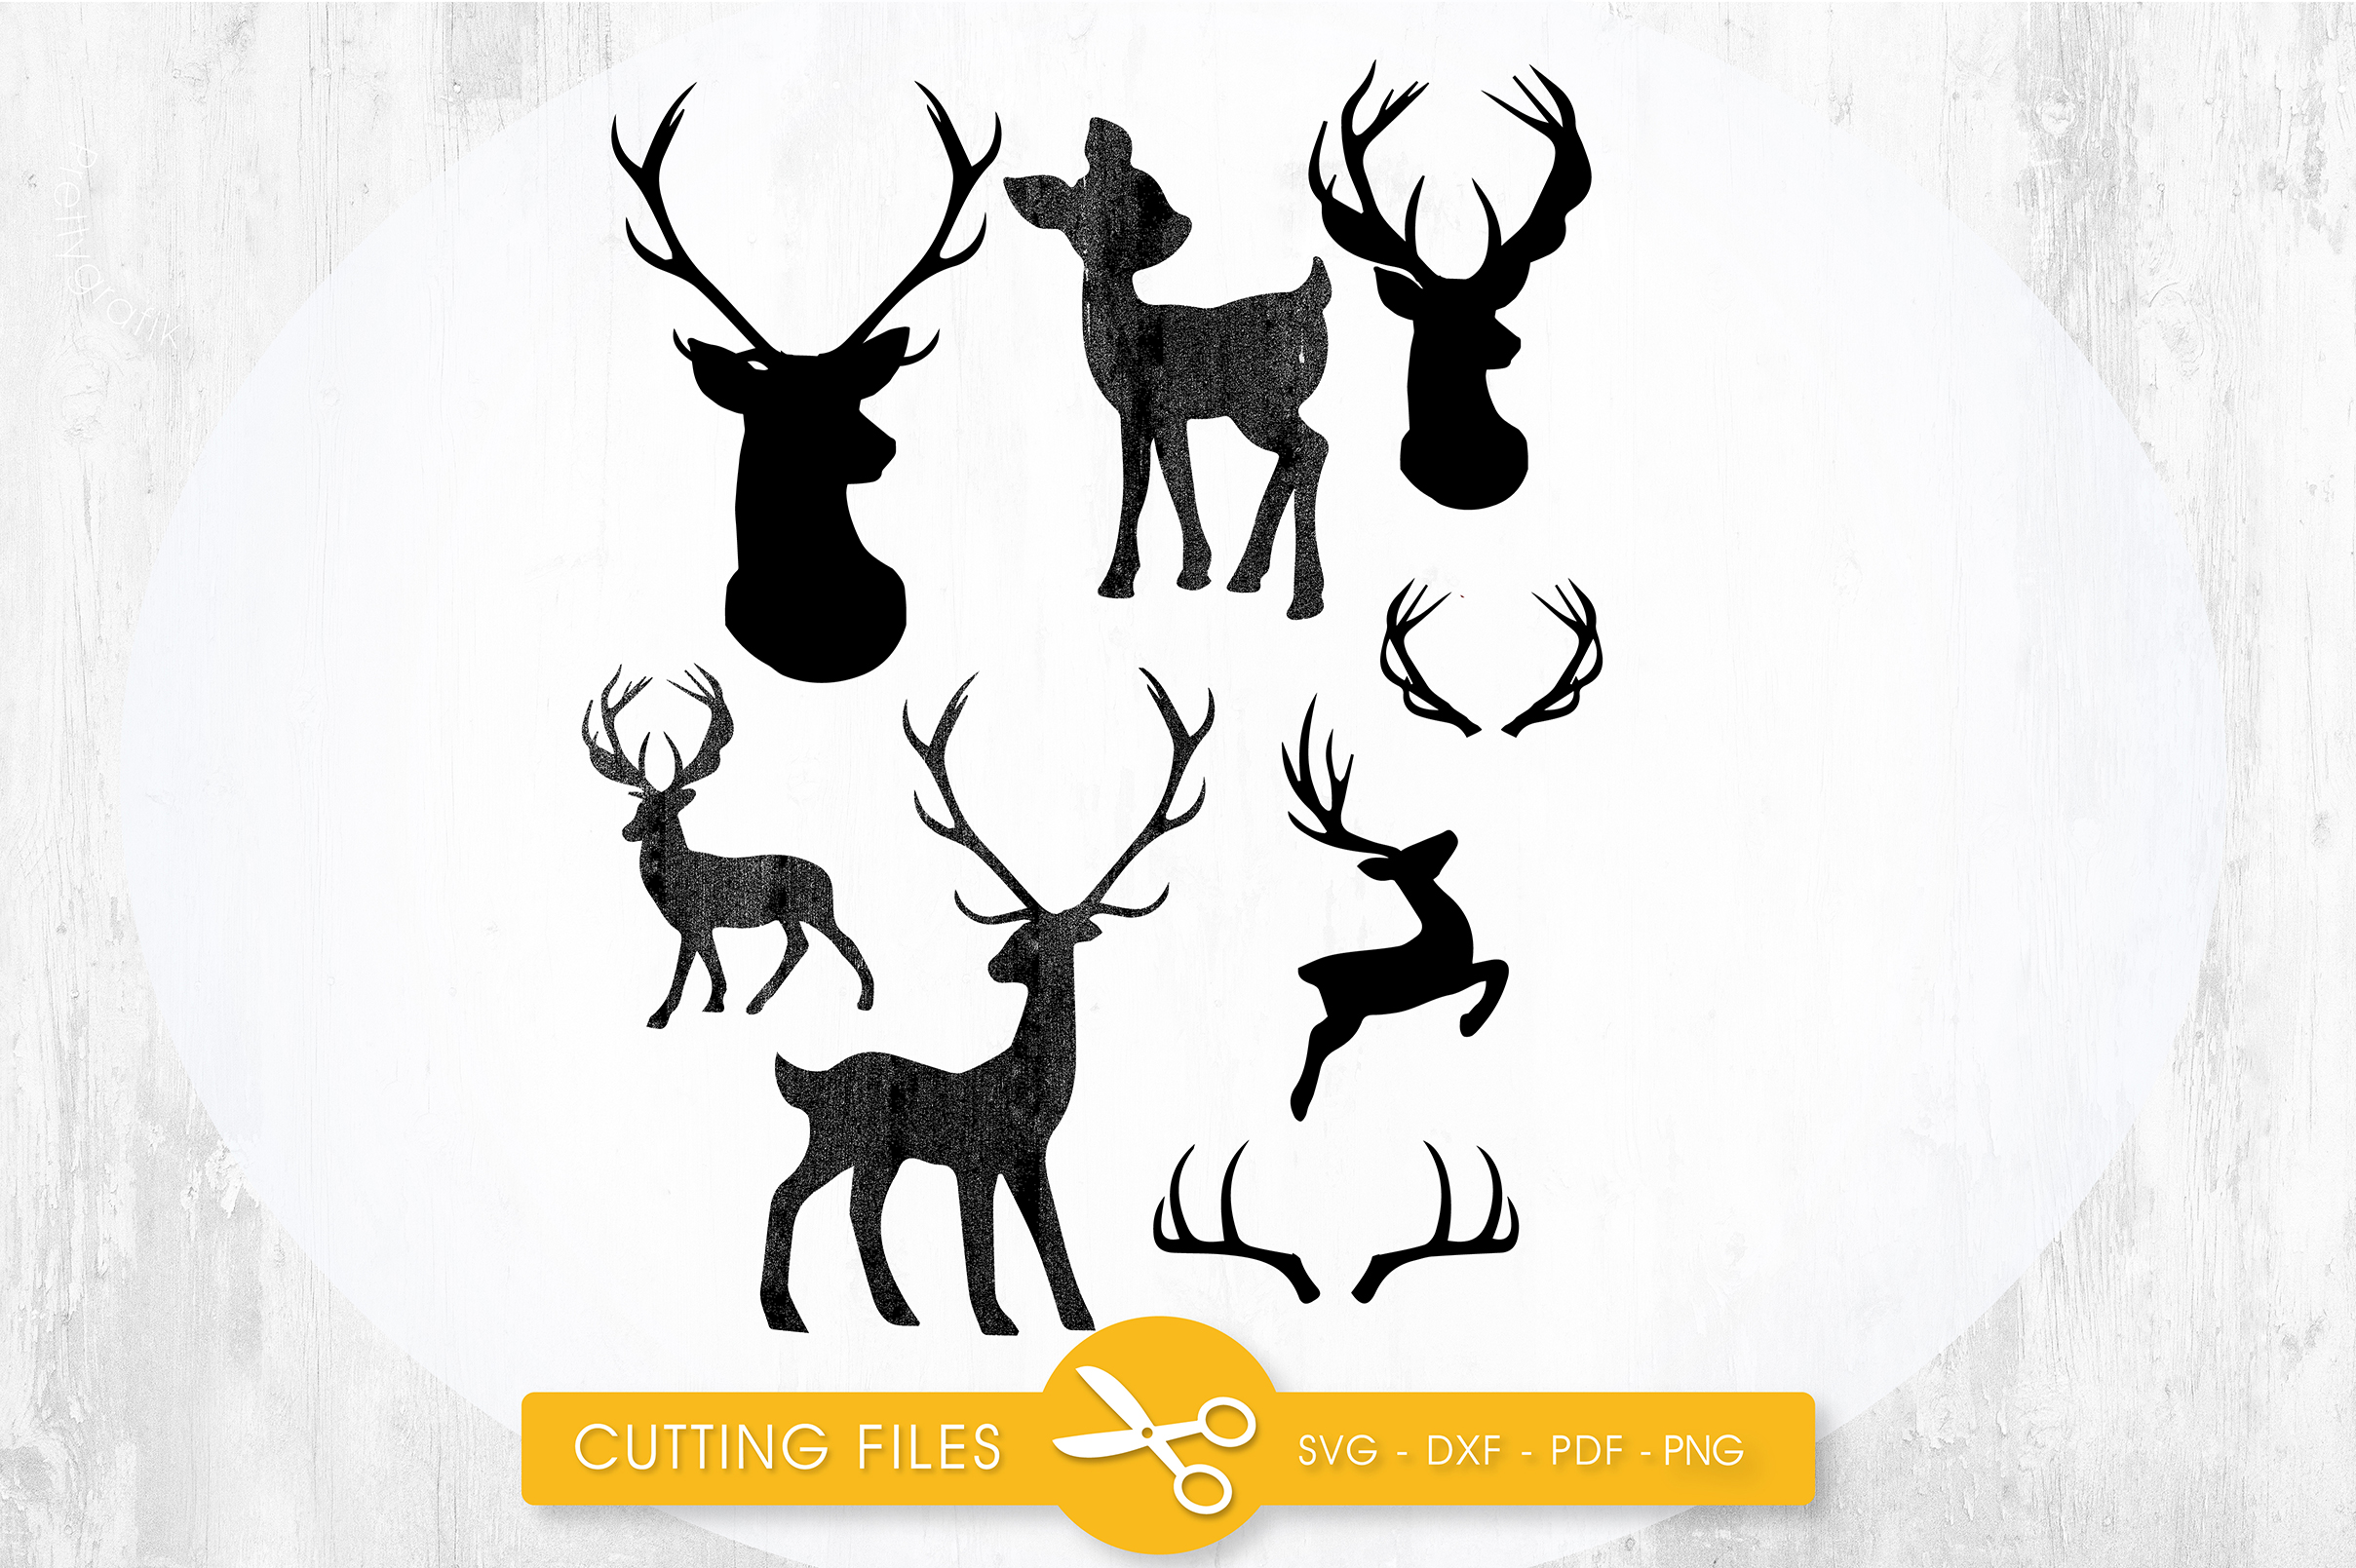 Download Deer Silhouettes cutting files svg, dxf, pdf, eps included - cut files for cricut and silhouette ...